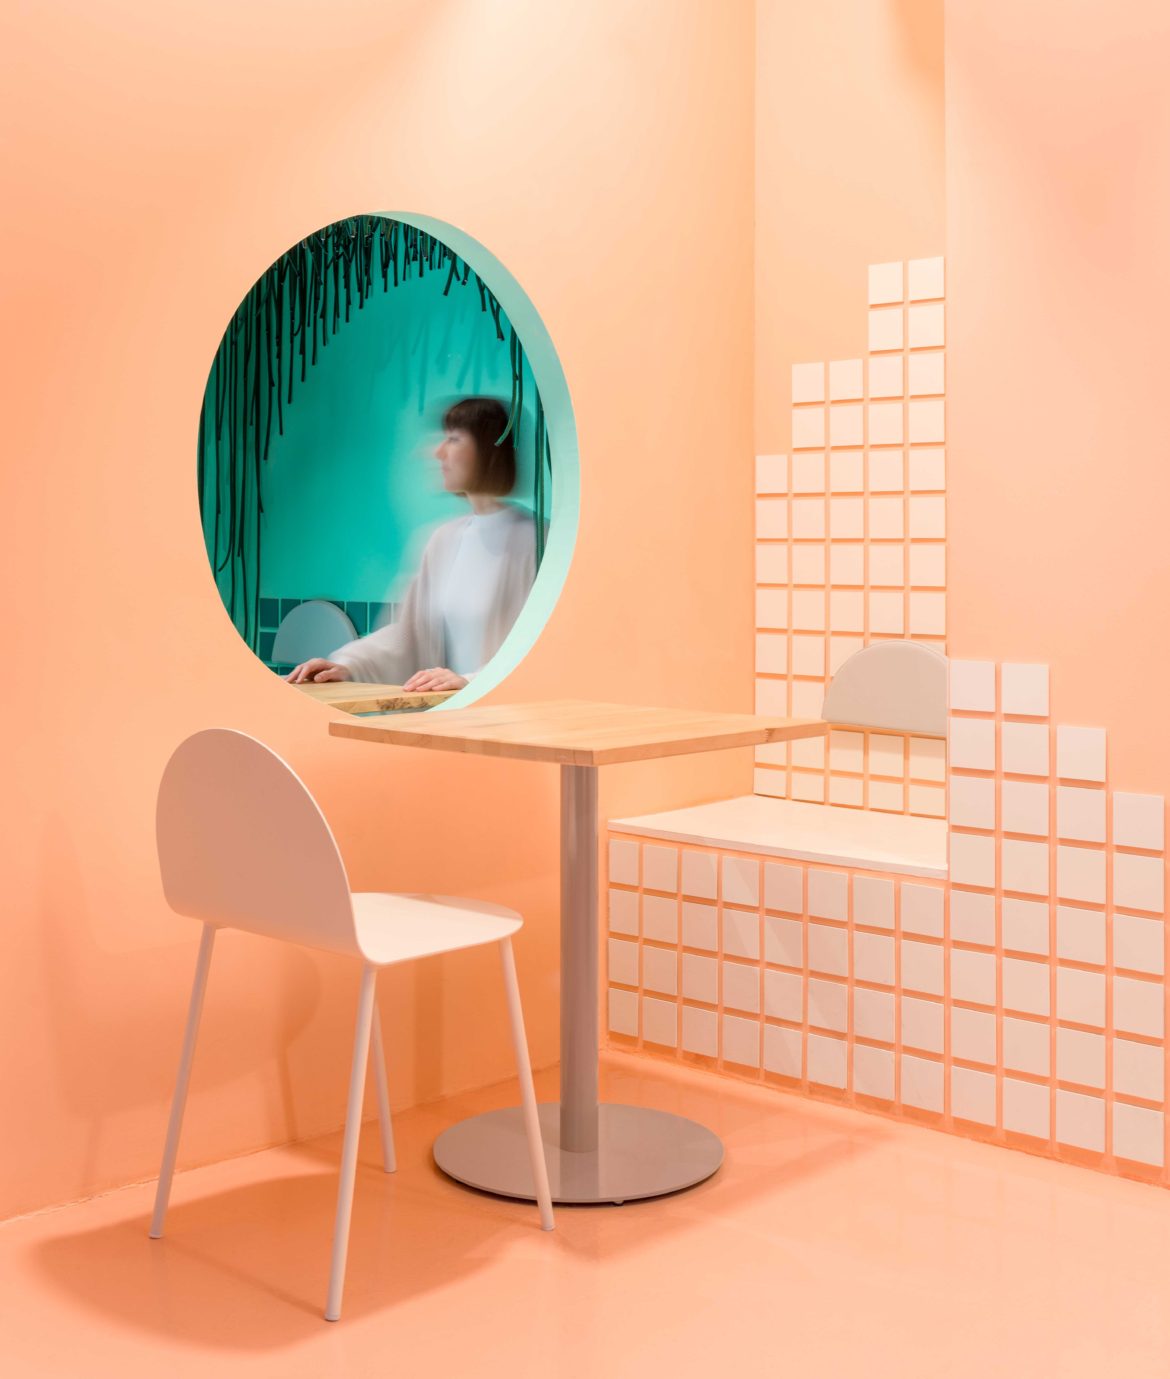 Chairs and Windows Inspired by the Shape of Bao Bun